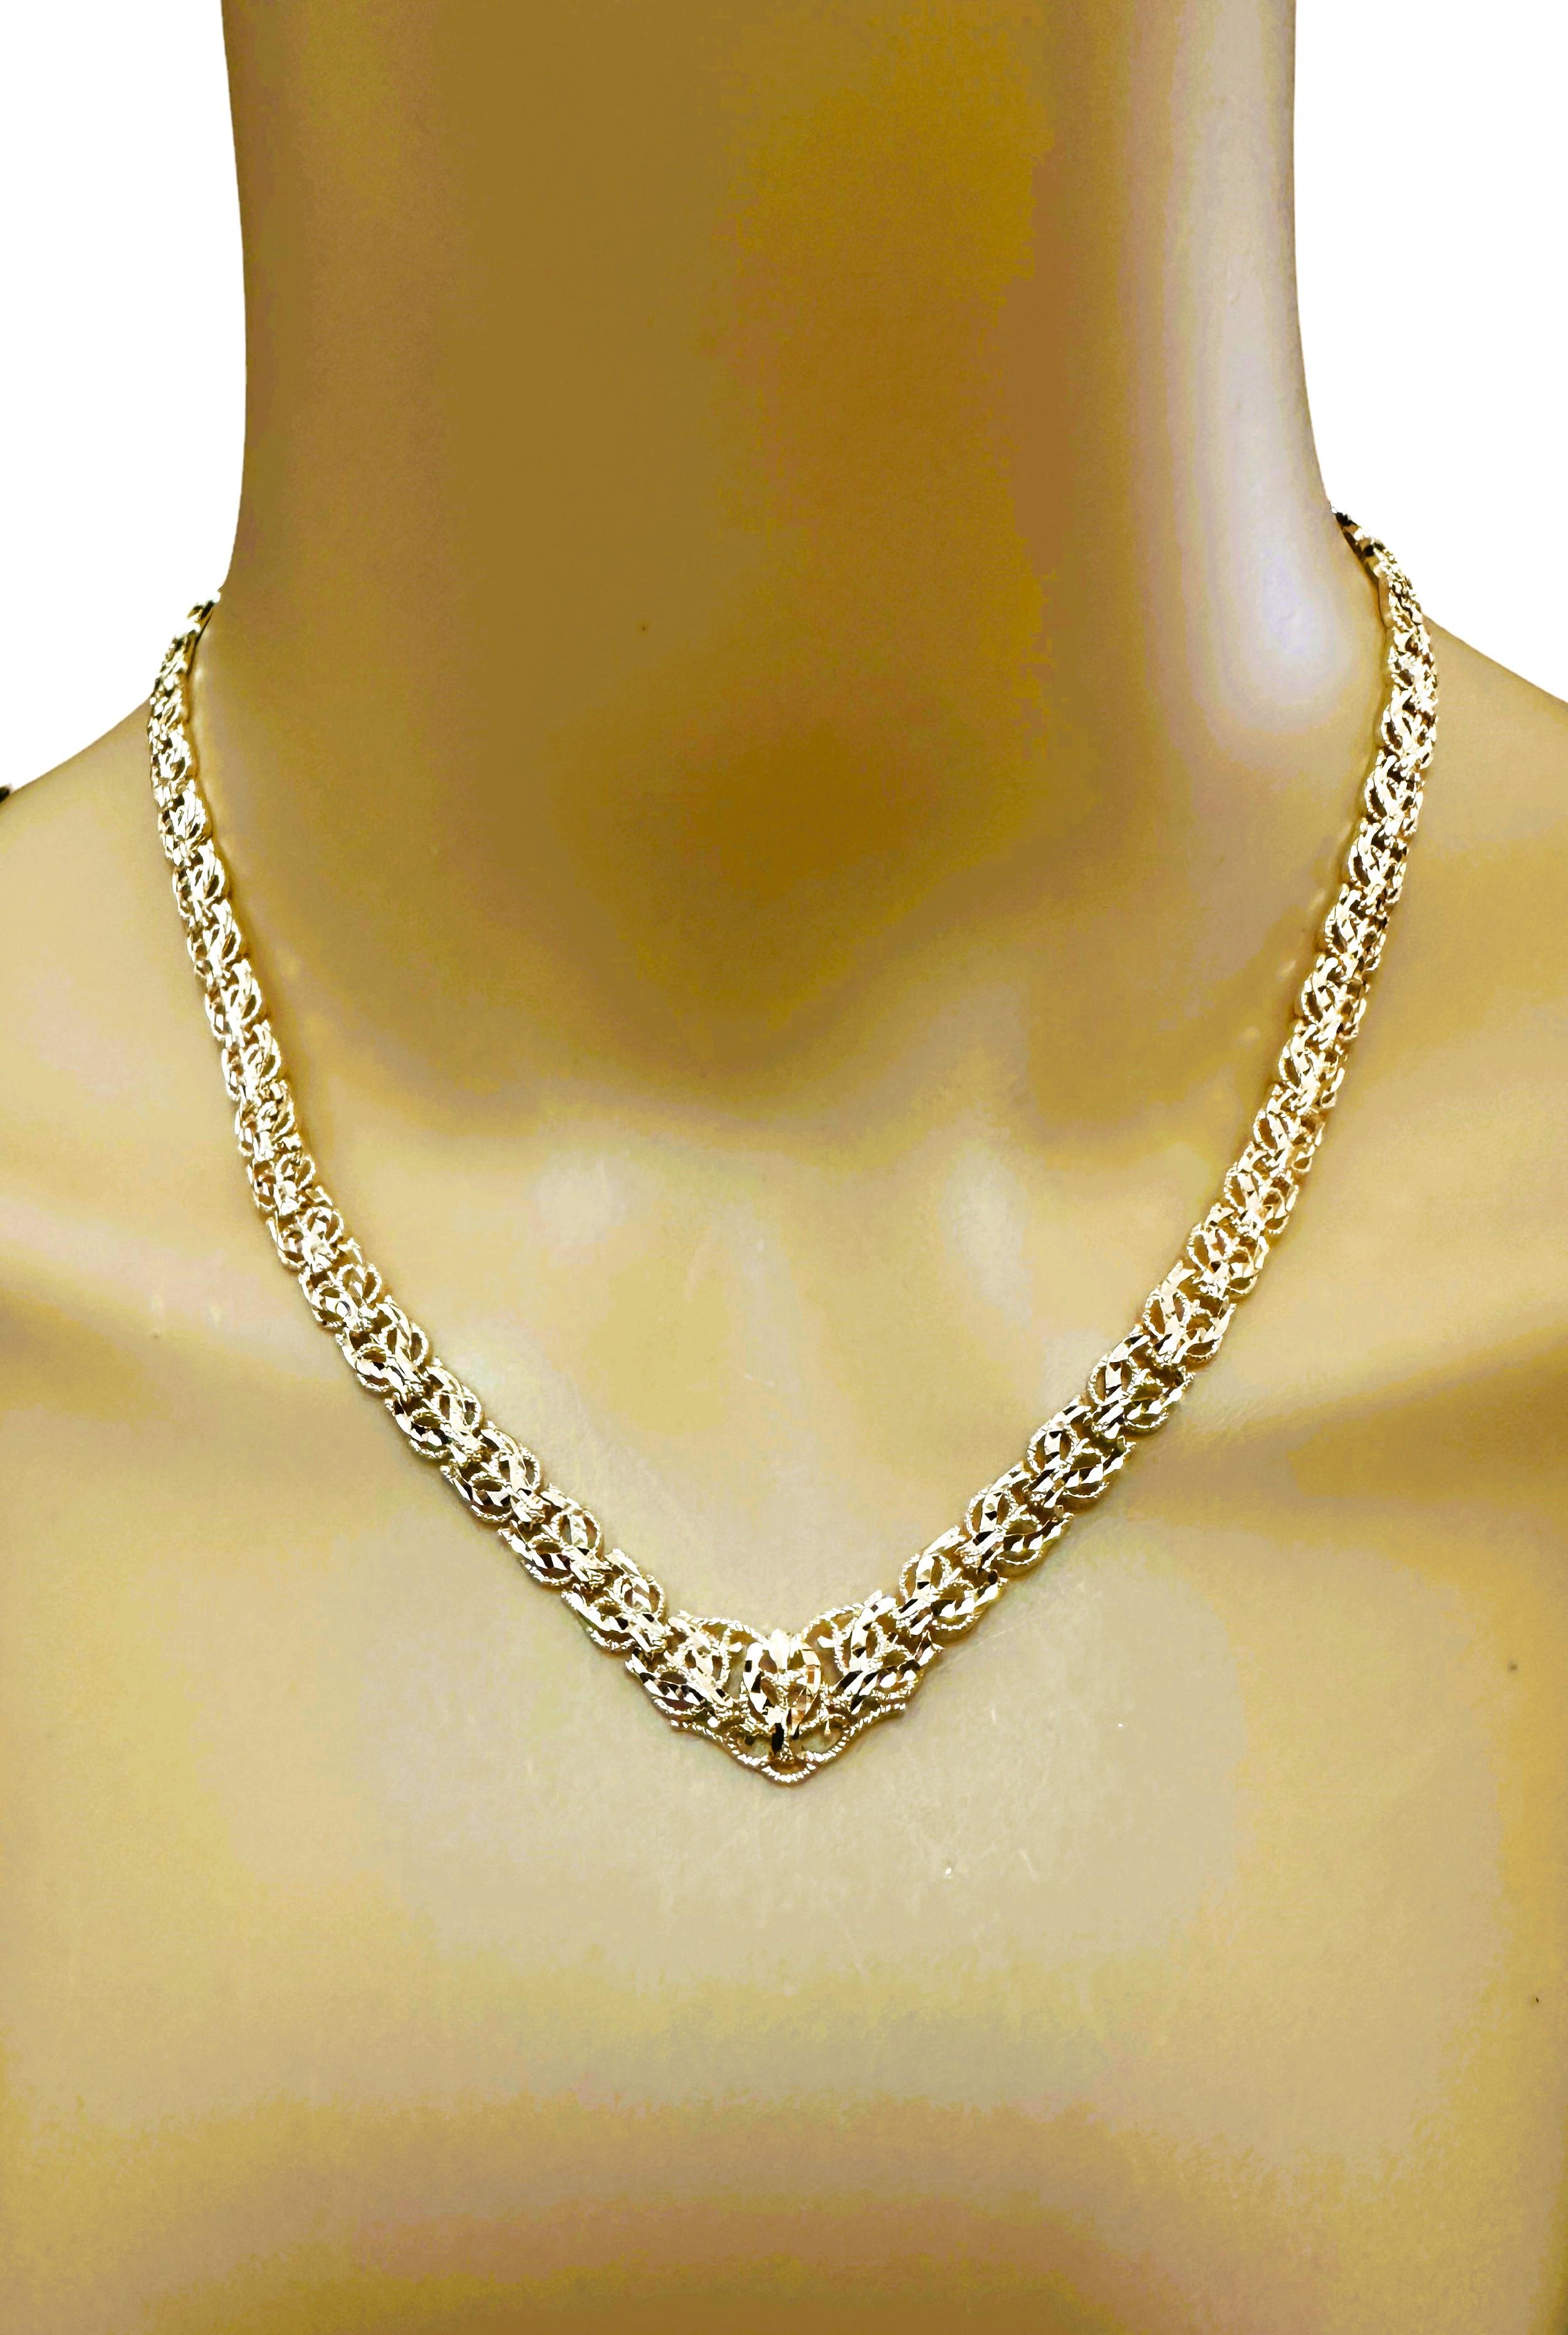 14k Yellow Gold Laser Cut Filigree V Necklace 20.69 Grams In Excellent Condition For Sale In Eagan, MN